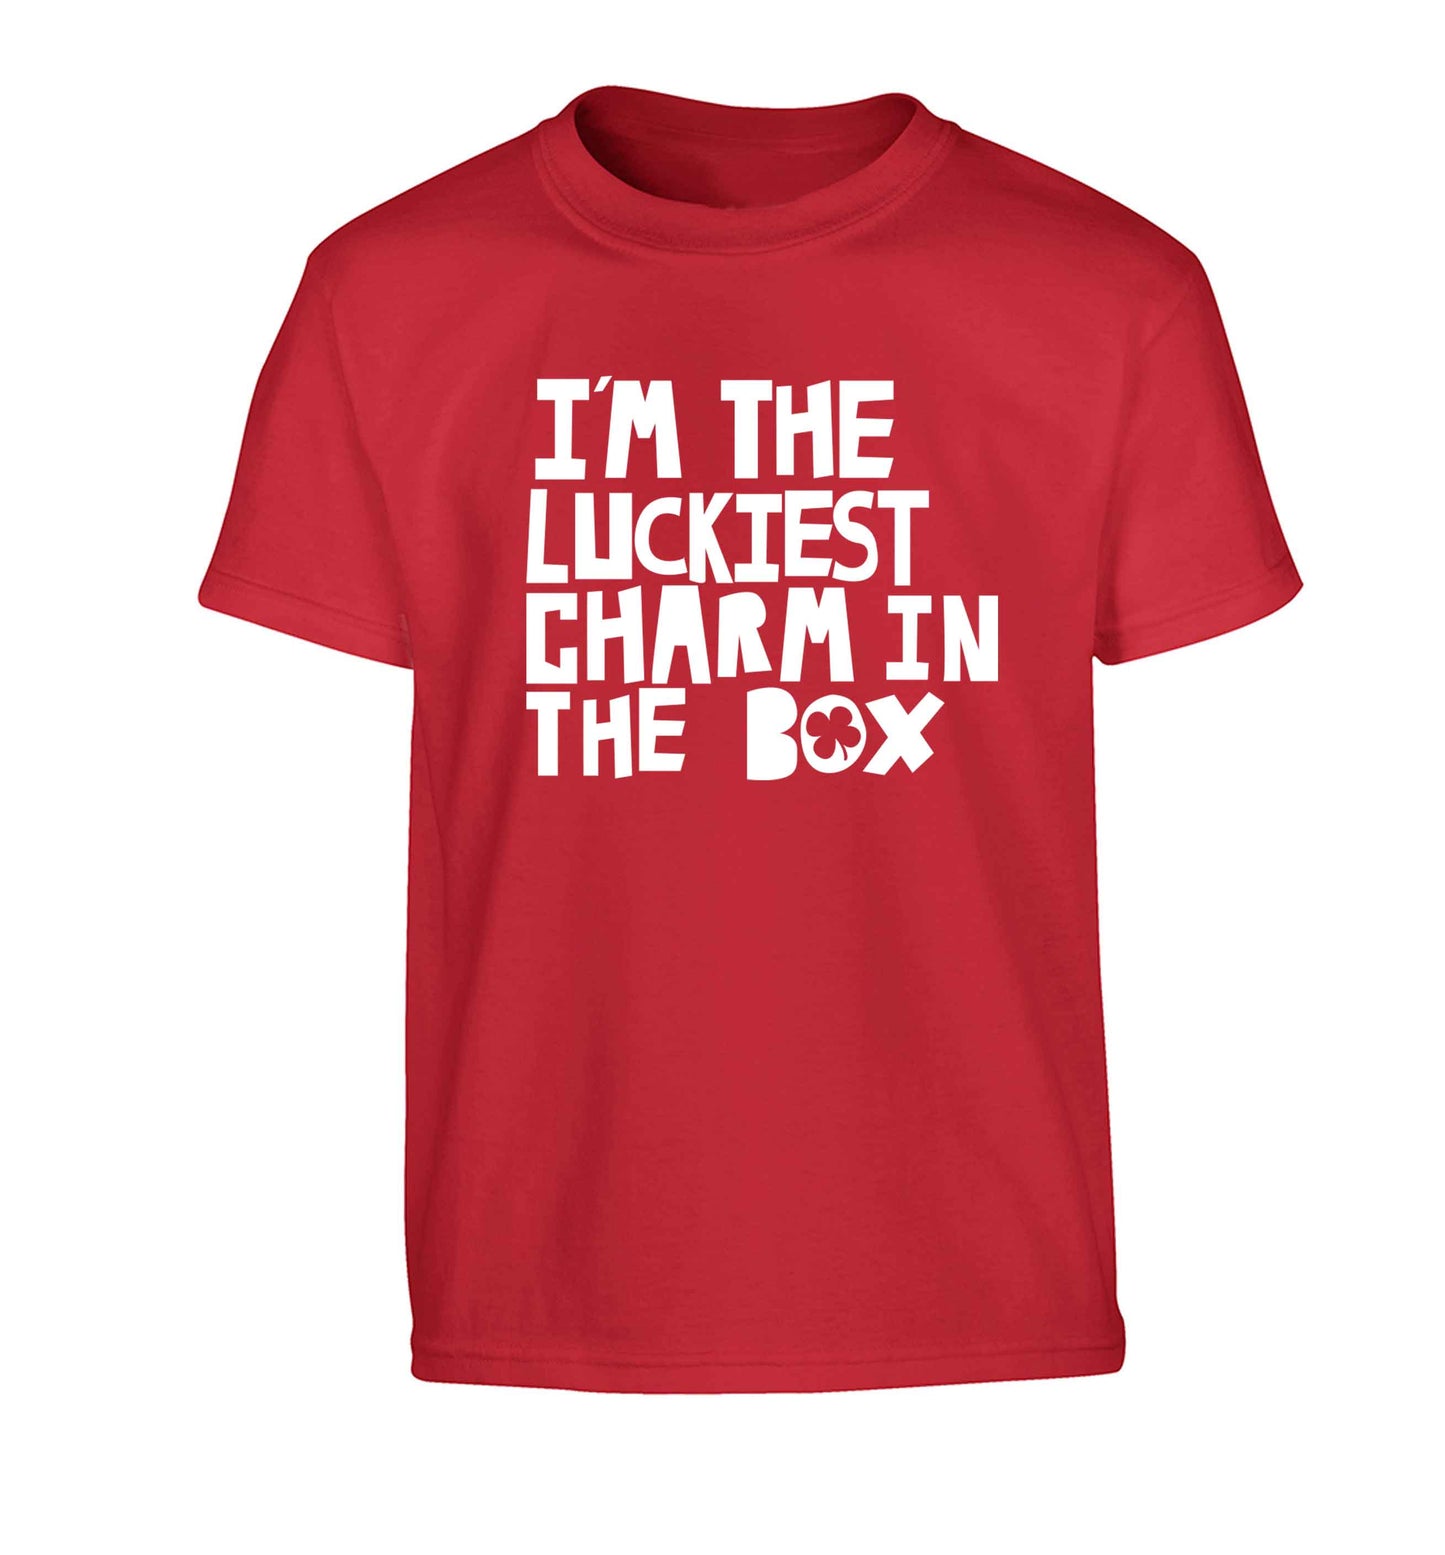 I'm the luckiest charm in the box Children's red Tshirt 12-13 Years